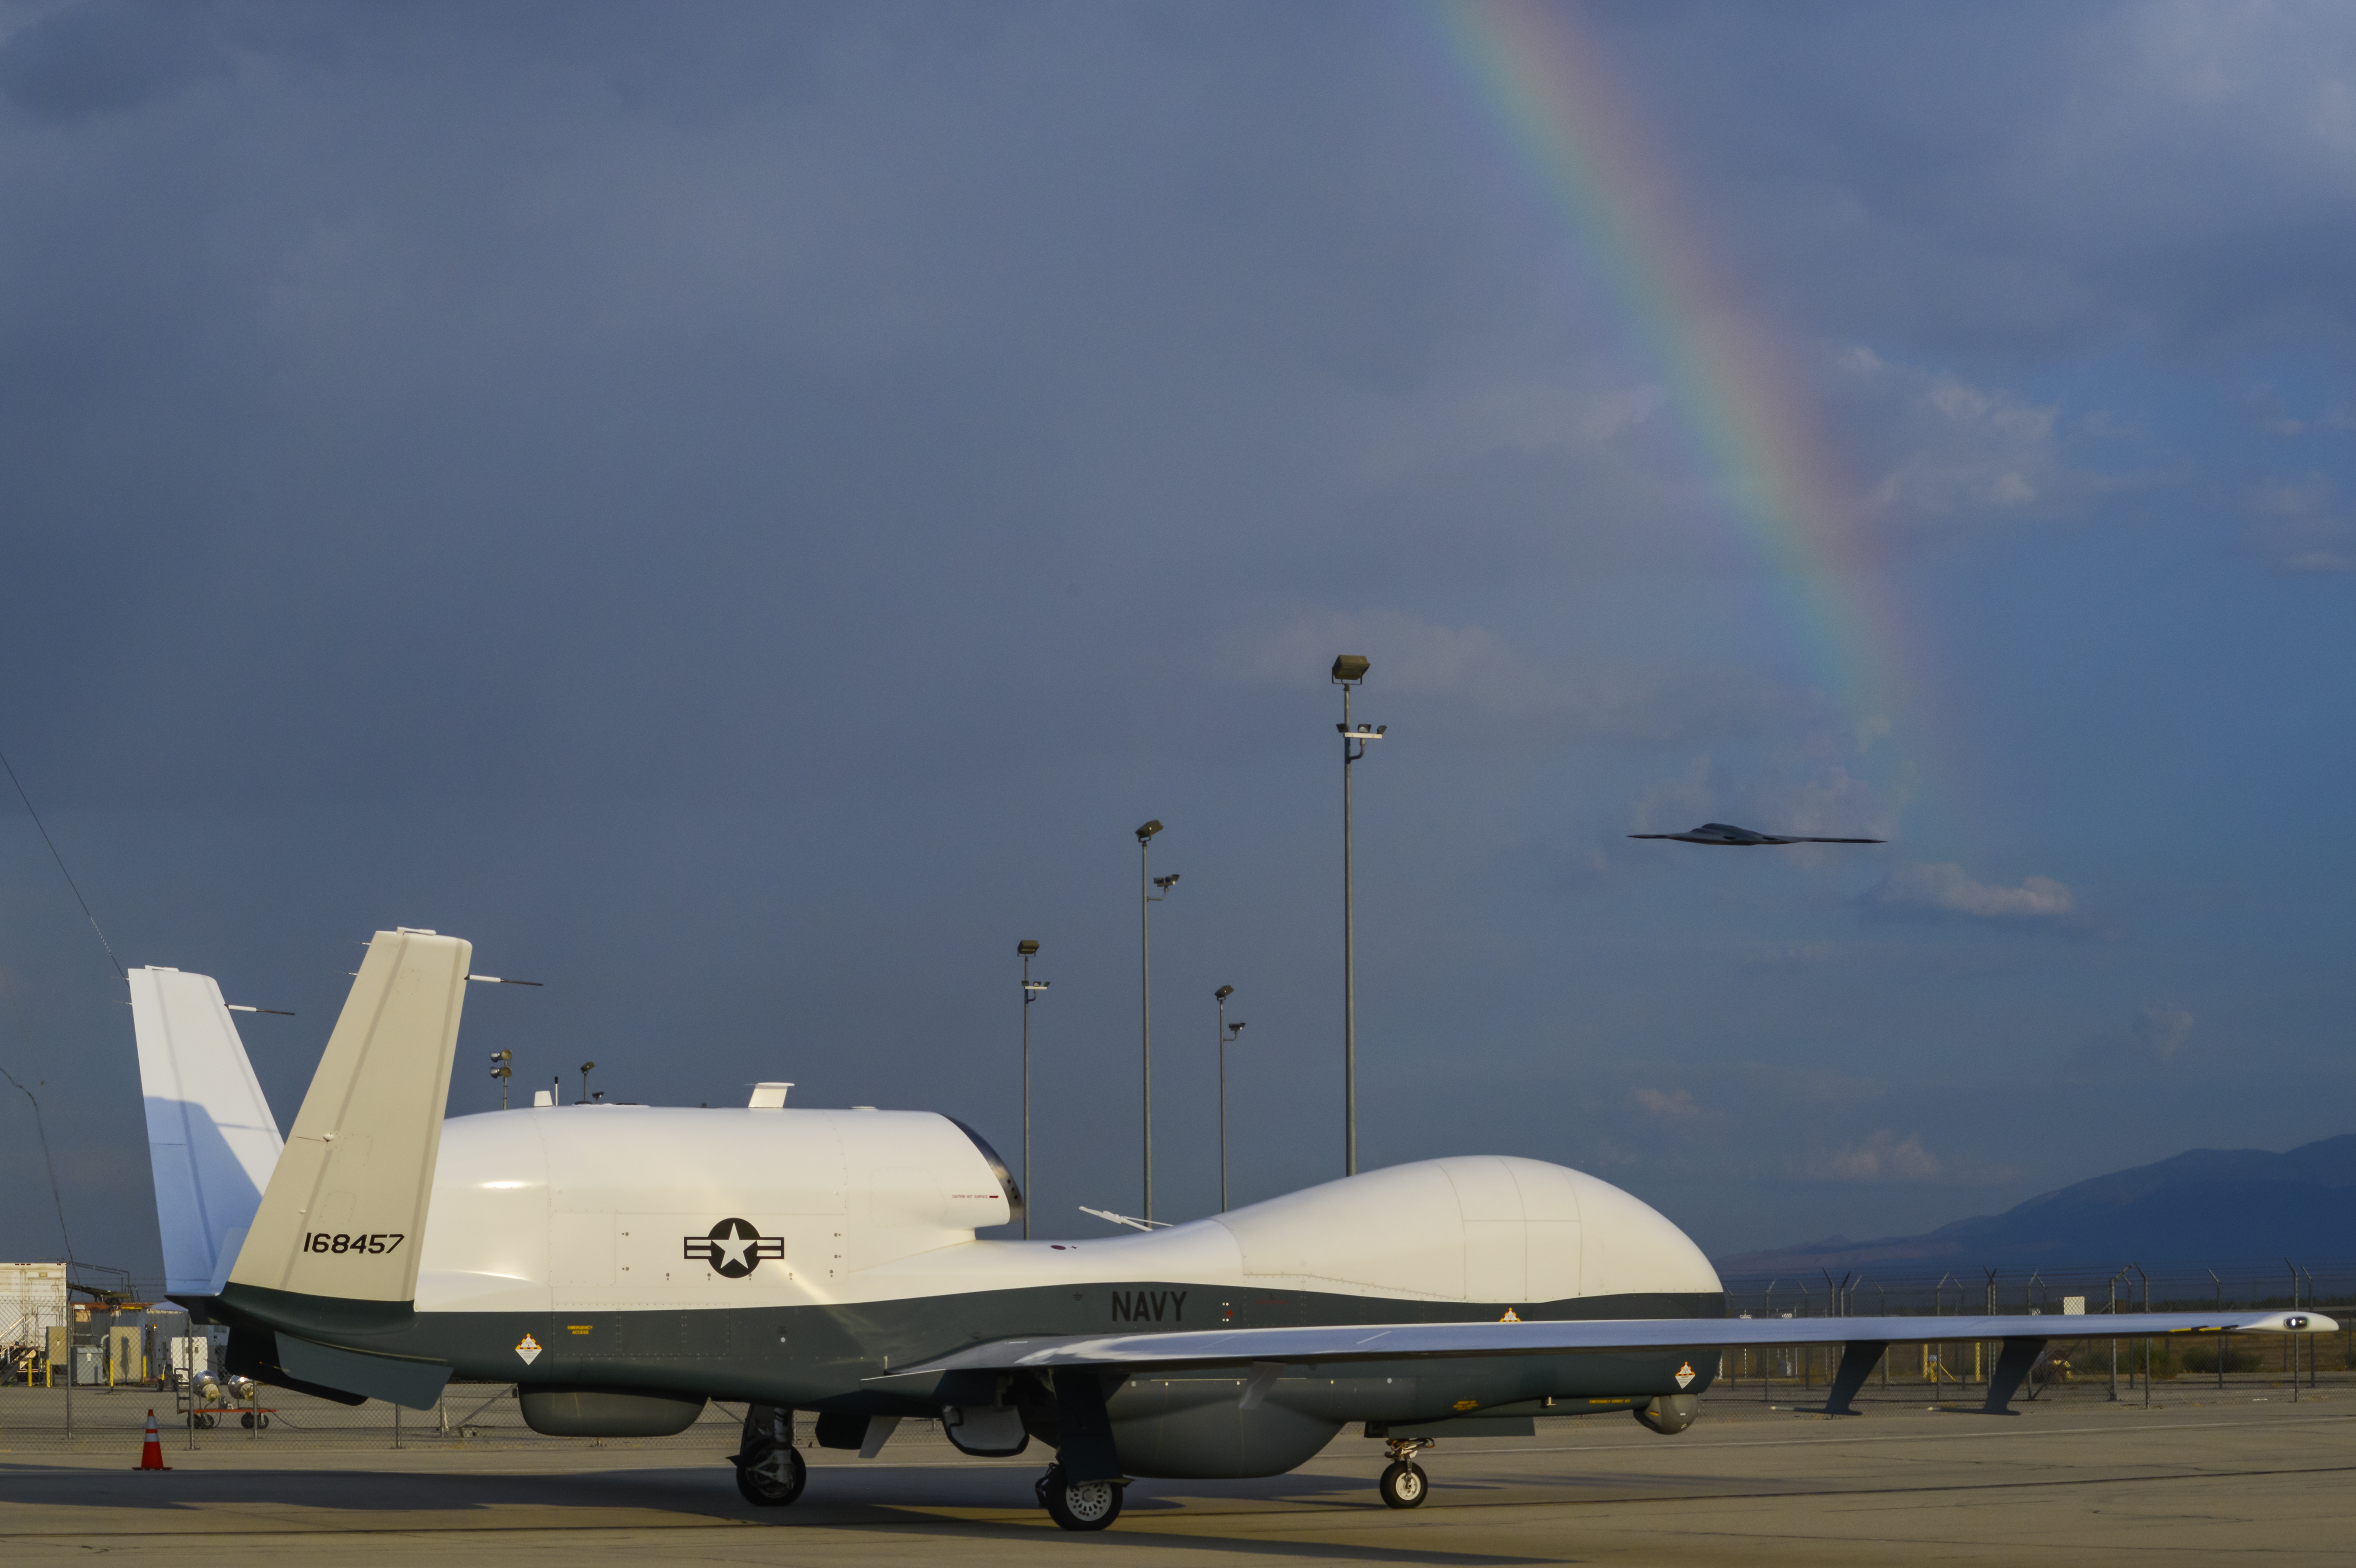 Following a successful Milestone Decision Authority (MDA) led review, the U.S. Navy’s MQ-4C Triton unmanned aircraft system (UAS) obtained positive Milestone C low-rate initial production approval. Northrop Grumman photo.